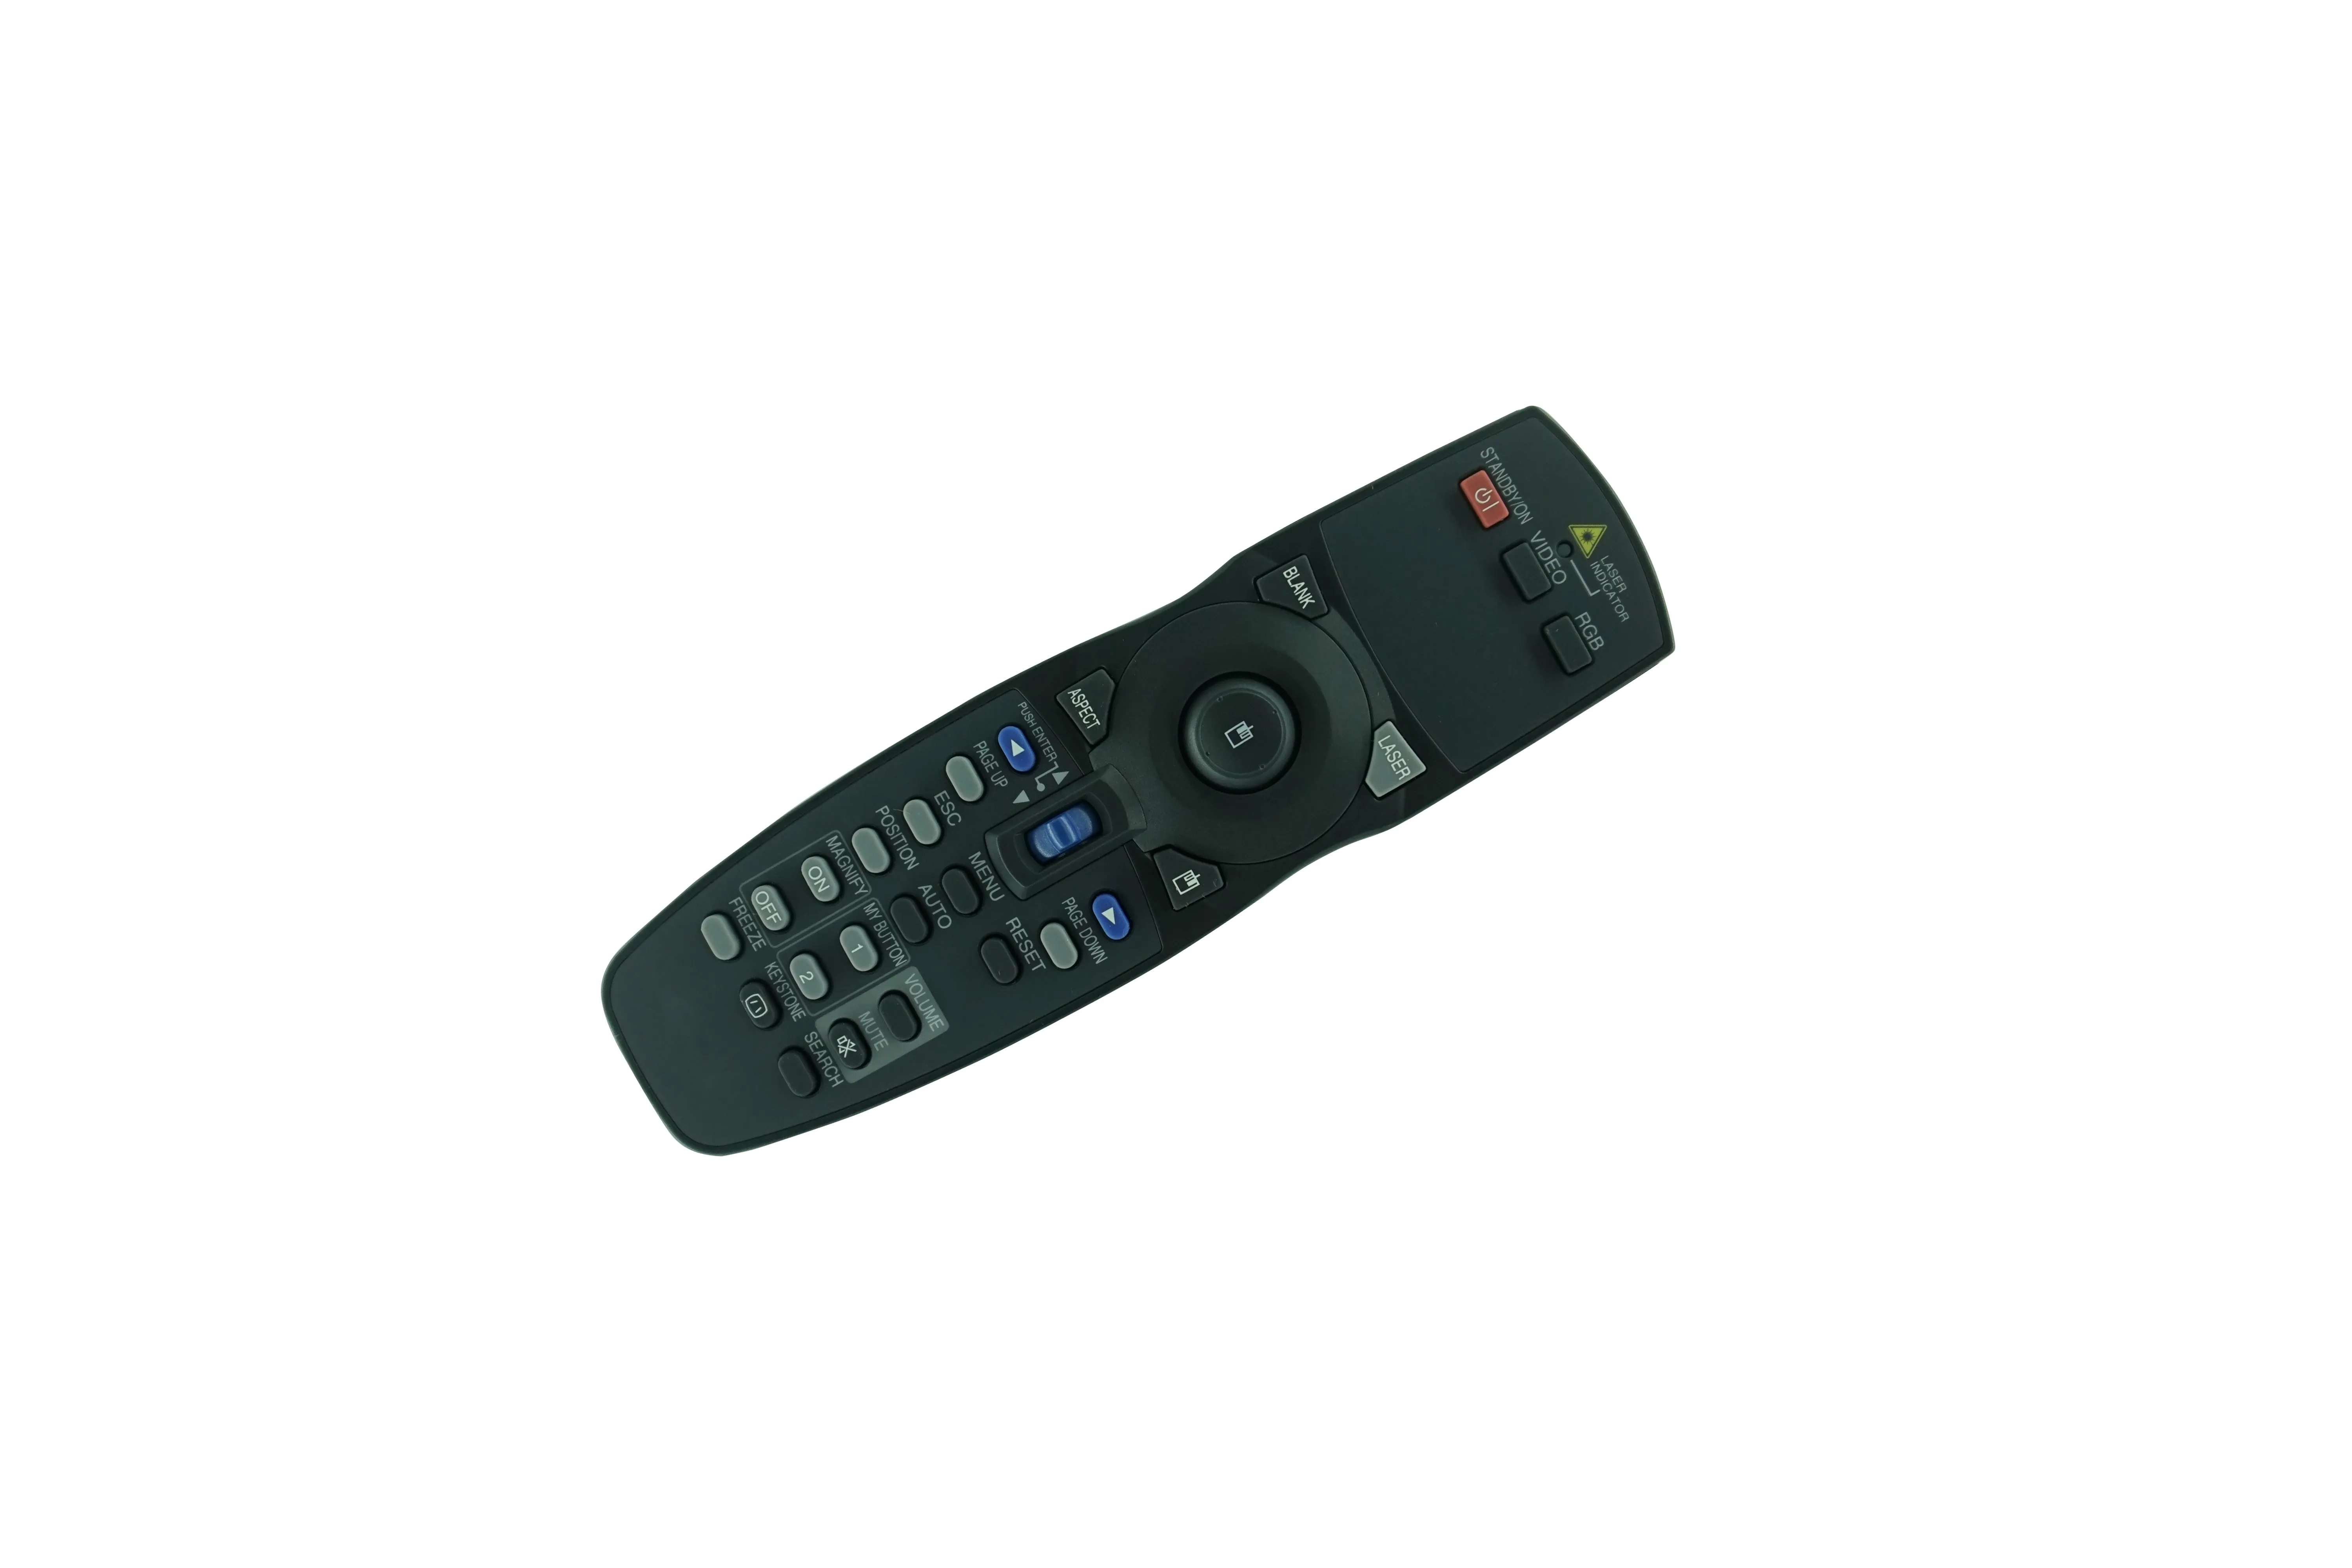 HCDZ Replacement Remote Control for Hitachi CP-SX12000 CP-SX1350 CP-SX8350 CP-WU8460 CP-BX301WN CP-CW251WN CP-CX251N Conference Room 3LCD Projector